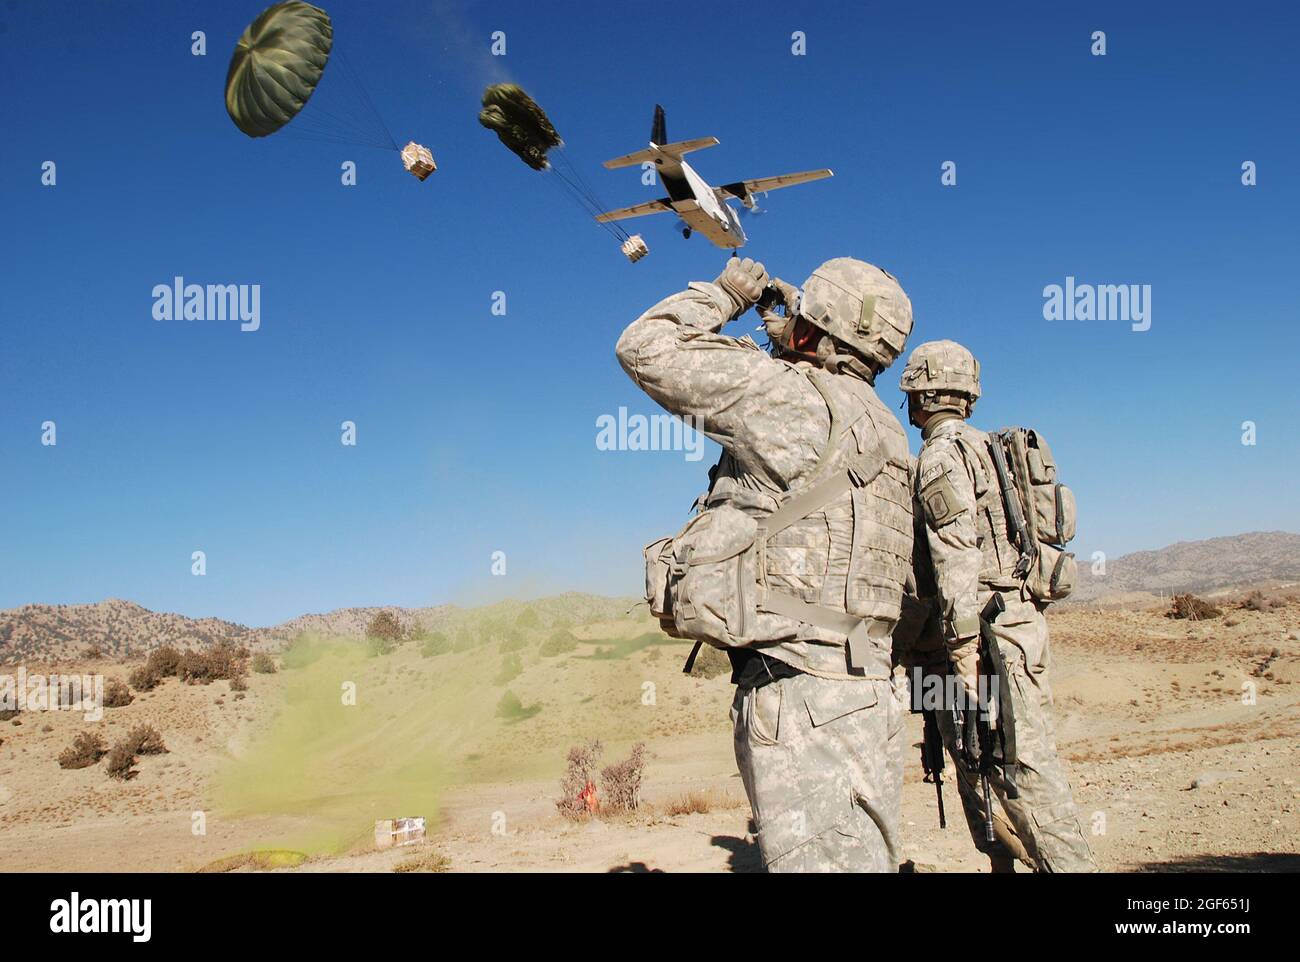 A paratrooper from 1st Battalion (Airborne), 503rd Infantry Regiment, 173rd Airborne Brigade, watches as an aircraft flies overhead while dropping supplies in Paktika province, Afghanistan, Nov. 9. Stock Photo